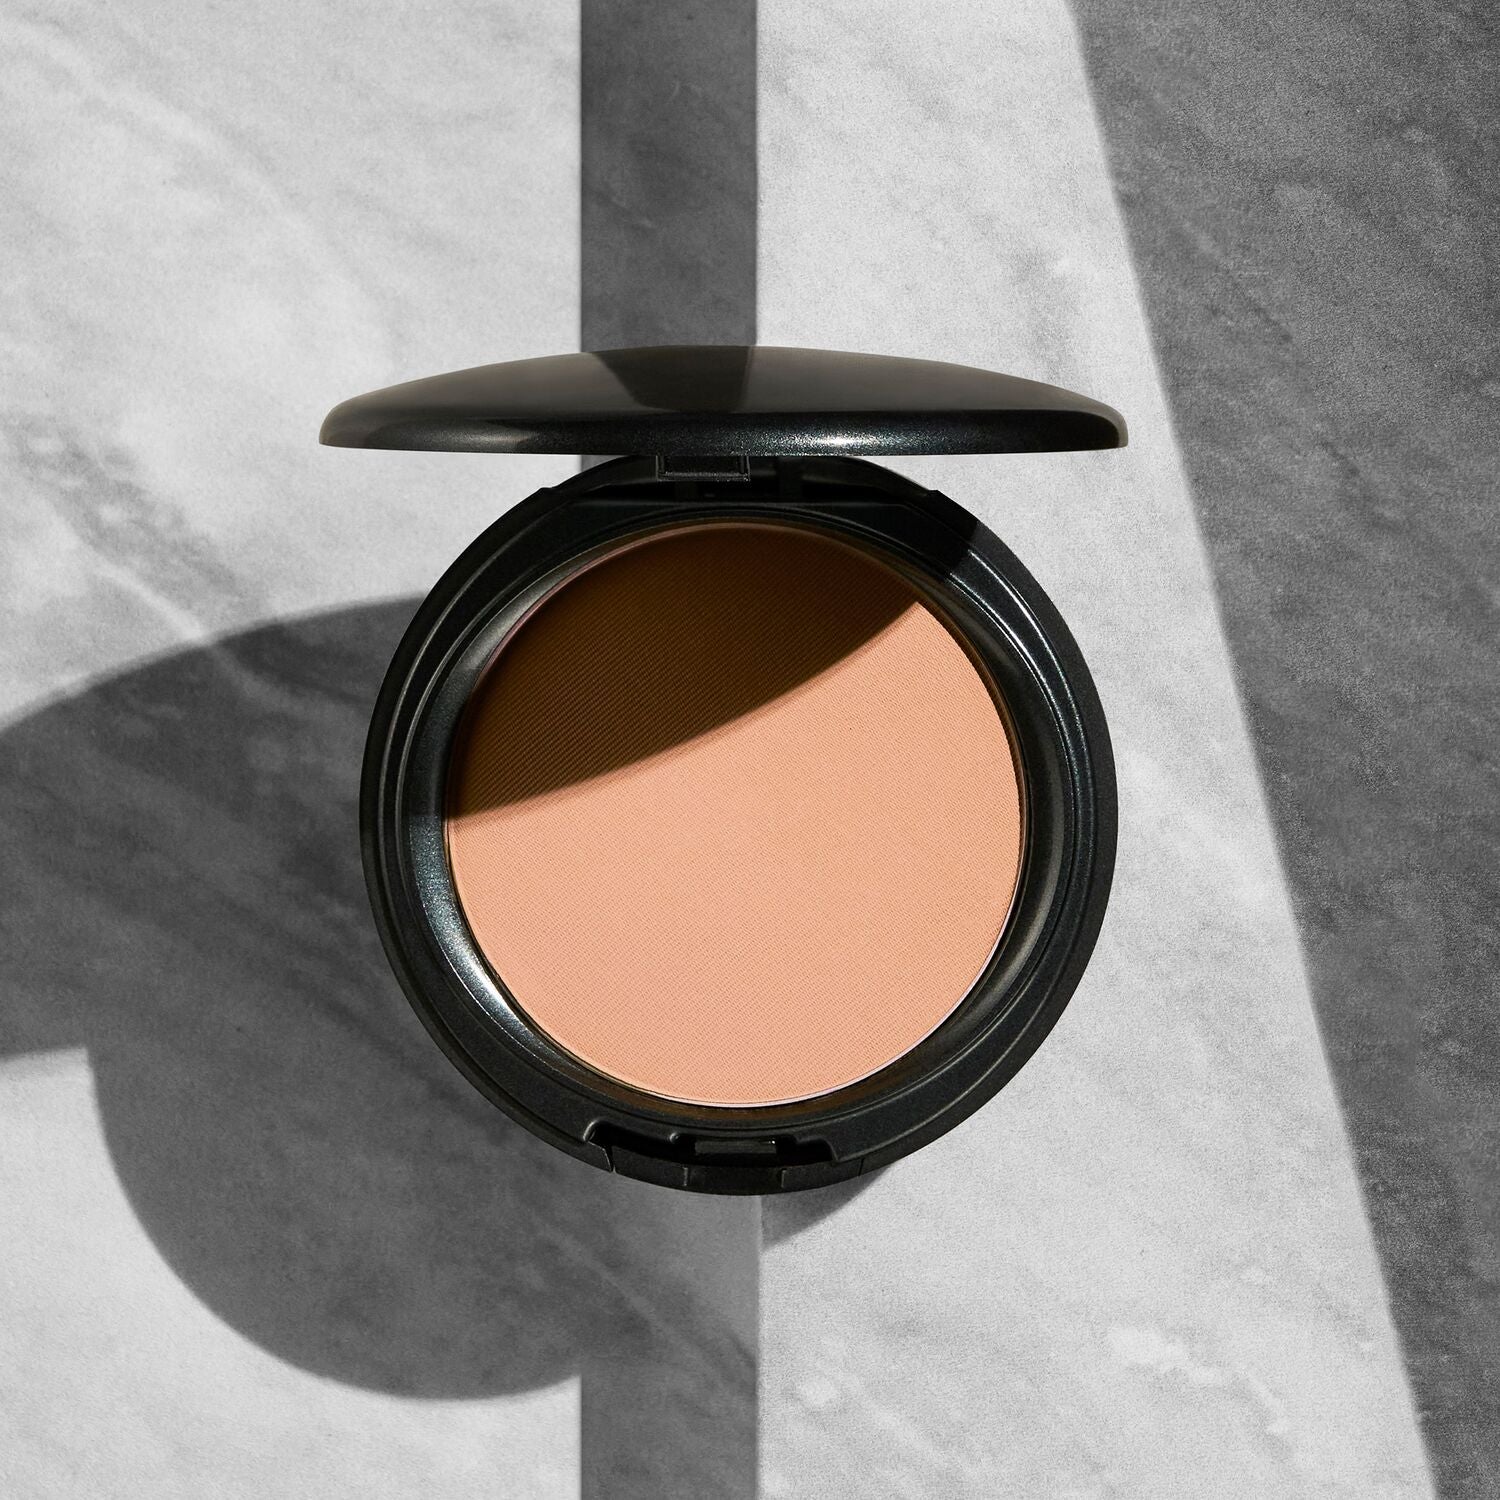 Coverfx Pressed Mineral Foundation in shade M3